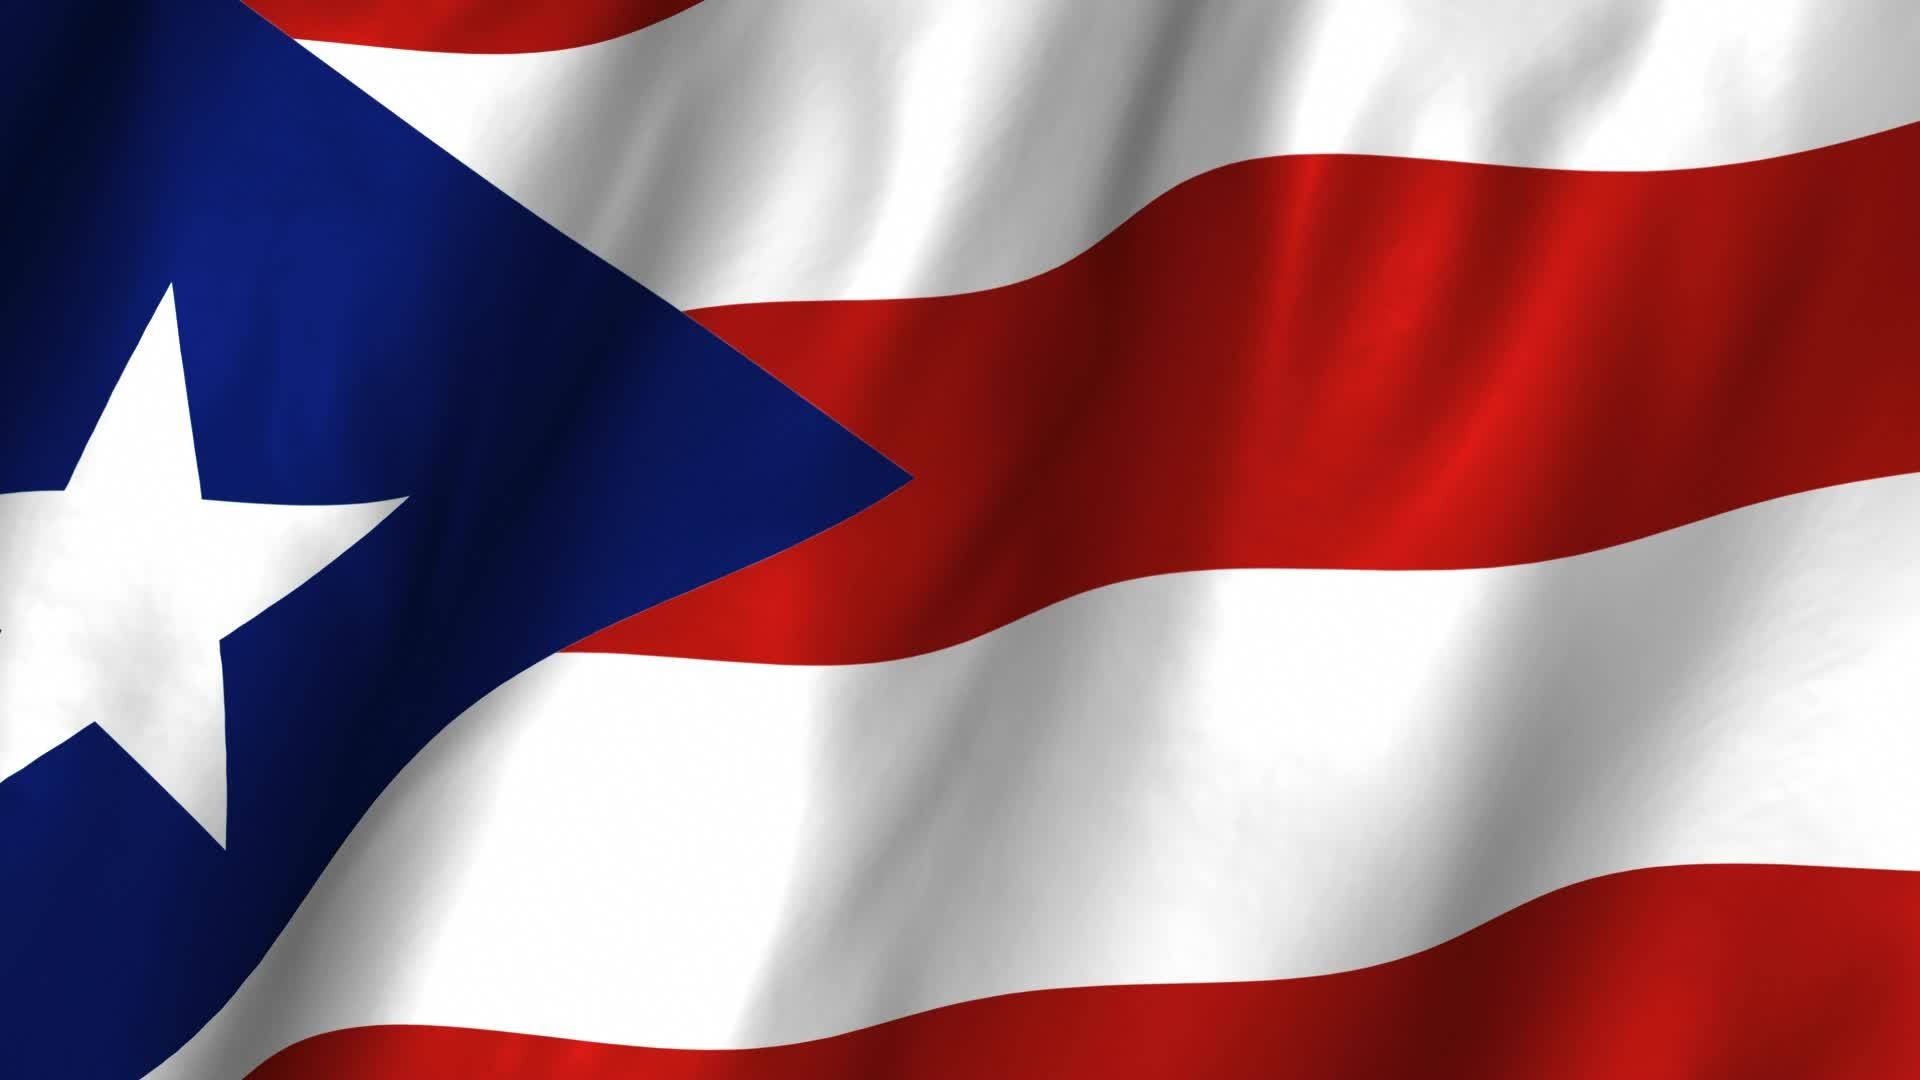 Puerto Rican Flag Waves Of Colors Wallpaper